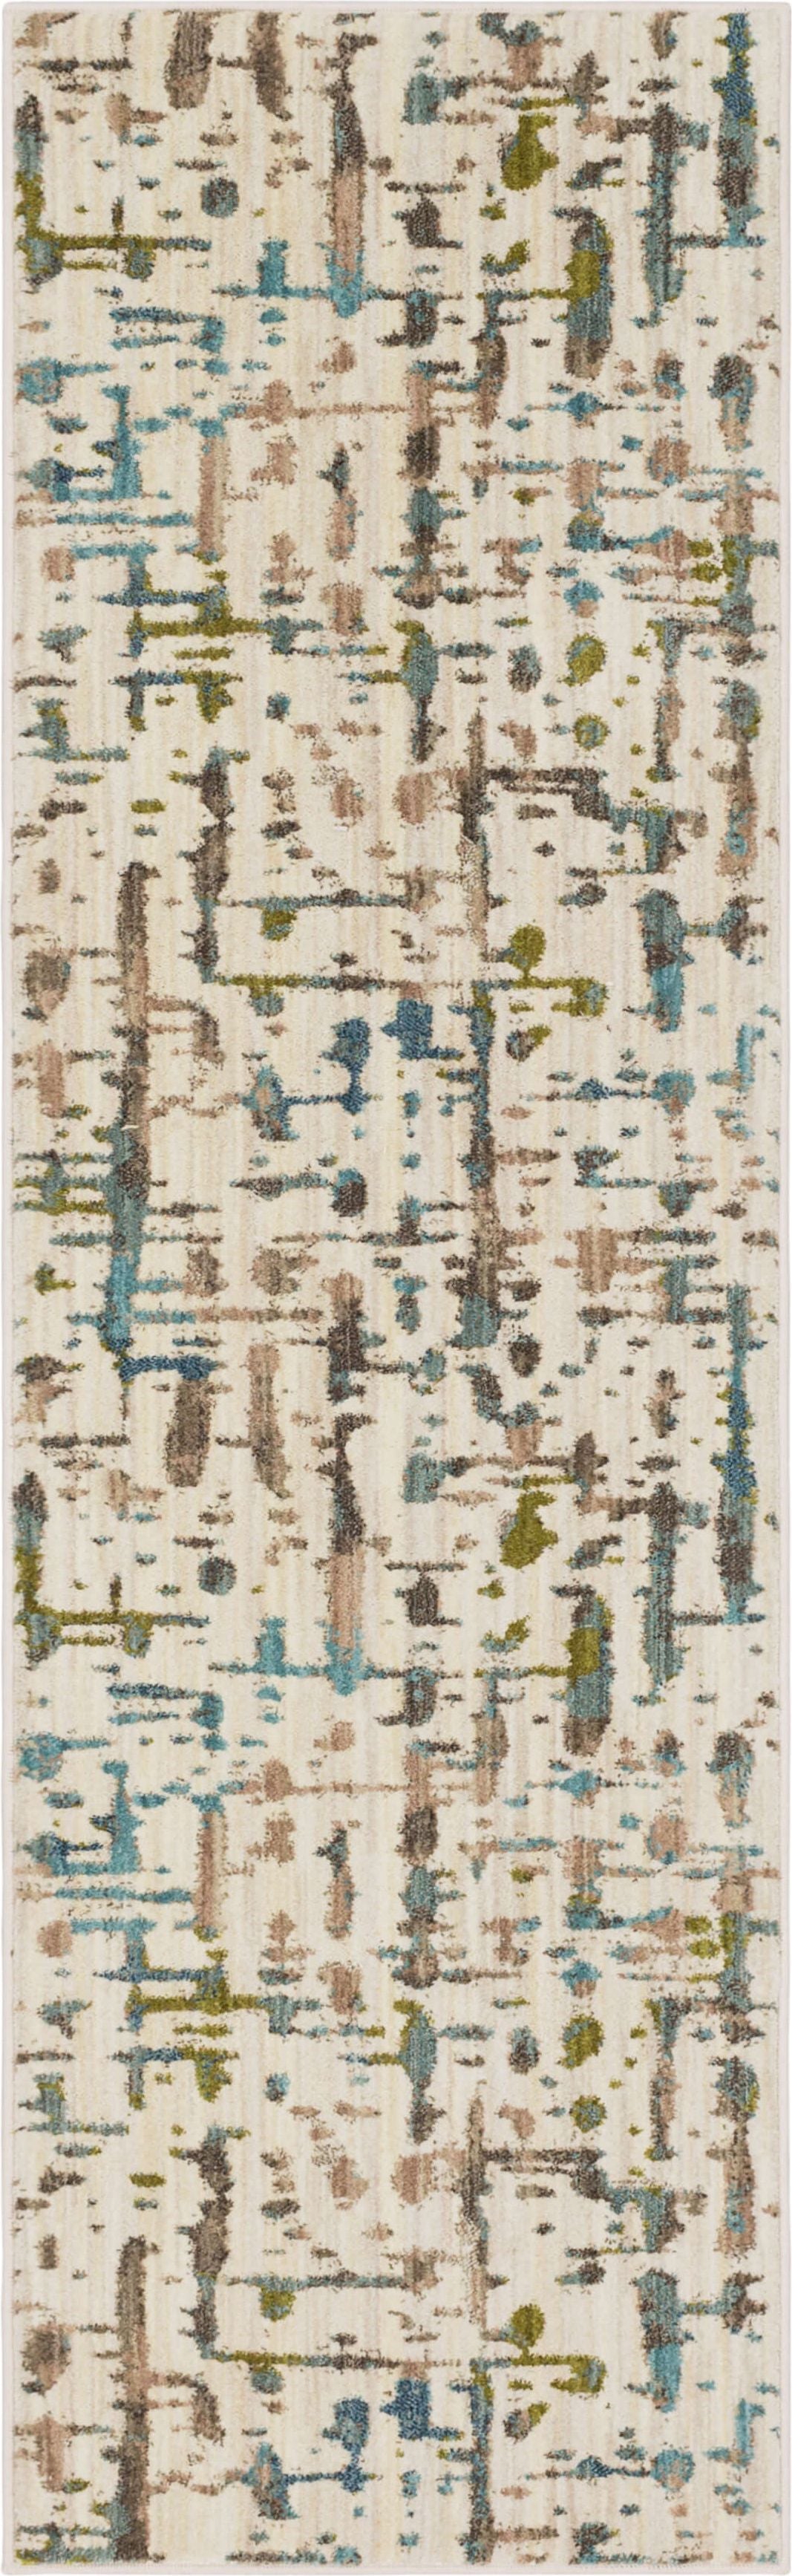 Scott Living Expressions by Scott Living 91668 Oyster  Casual Machinemade Rug